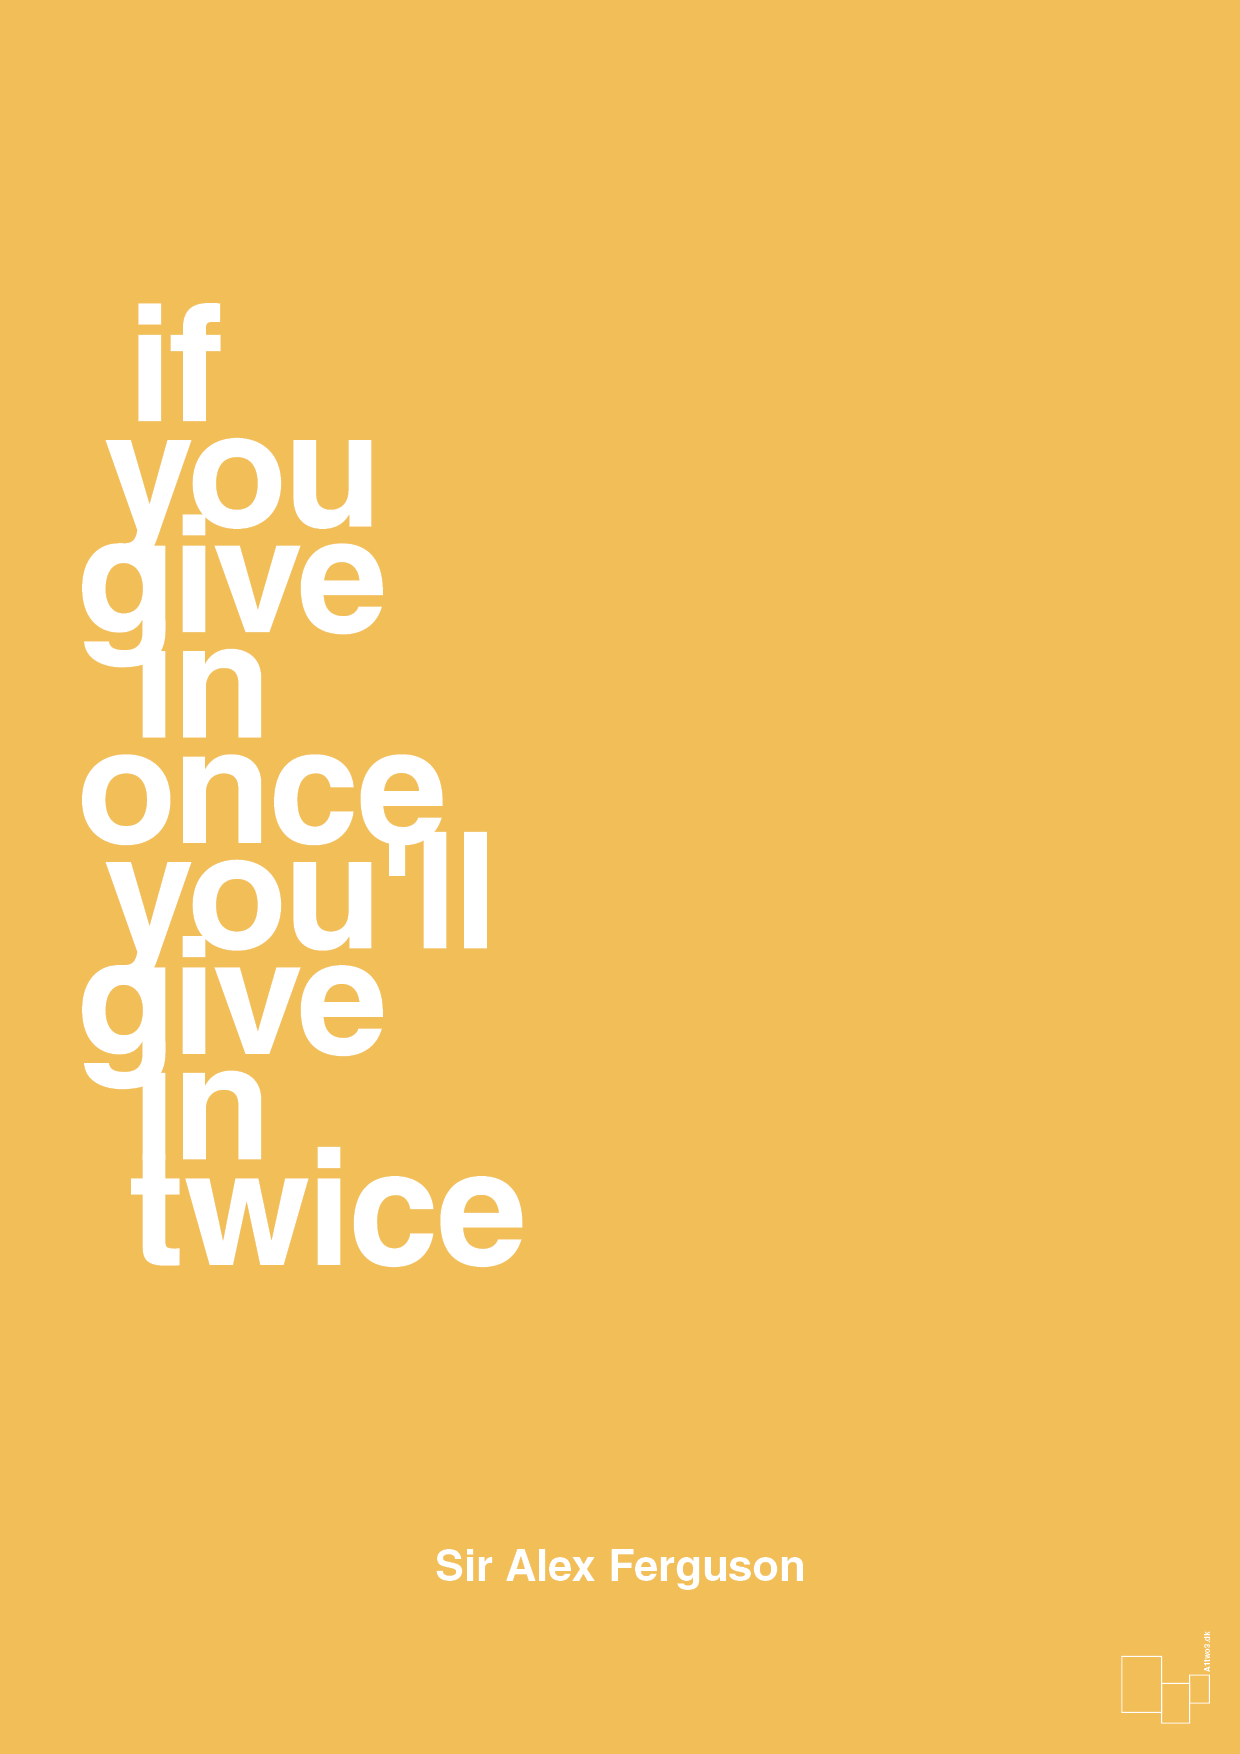 if you give in once you'll give in twice - Plakat med Citater i Honeycomb